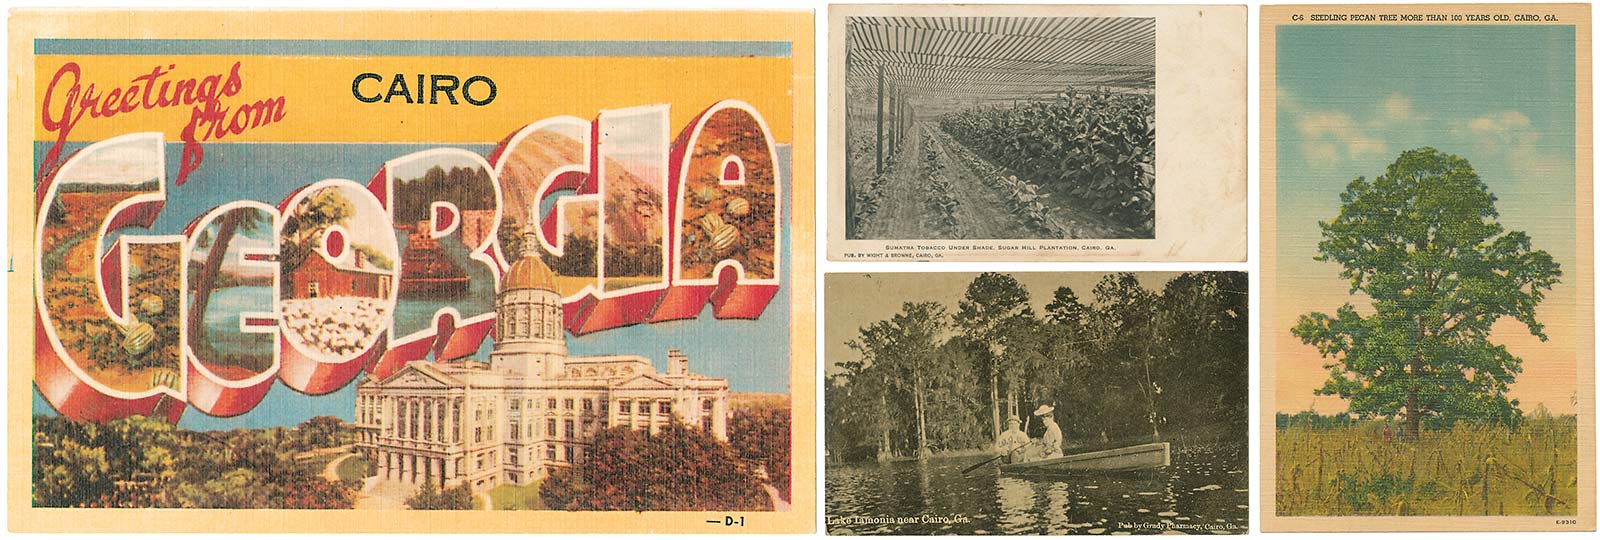 Opposite</b>: Printing a town’s name on a state-focused postcard was common. Pecans, waterways and tobacco appeared on postcards, too. The sender of the card at <b>lower left</b> wrote, “We are having a lot of picnics now. That one at Cairo was exceedingly fine.”